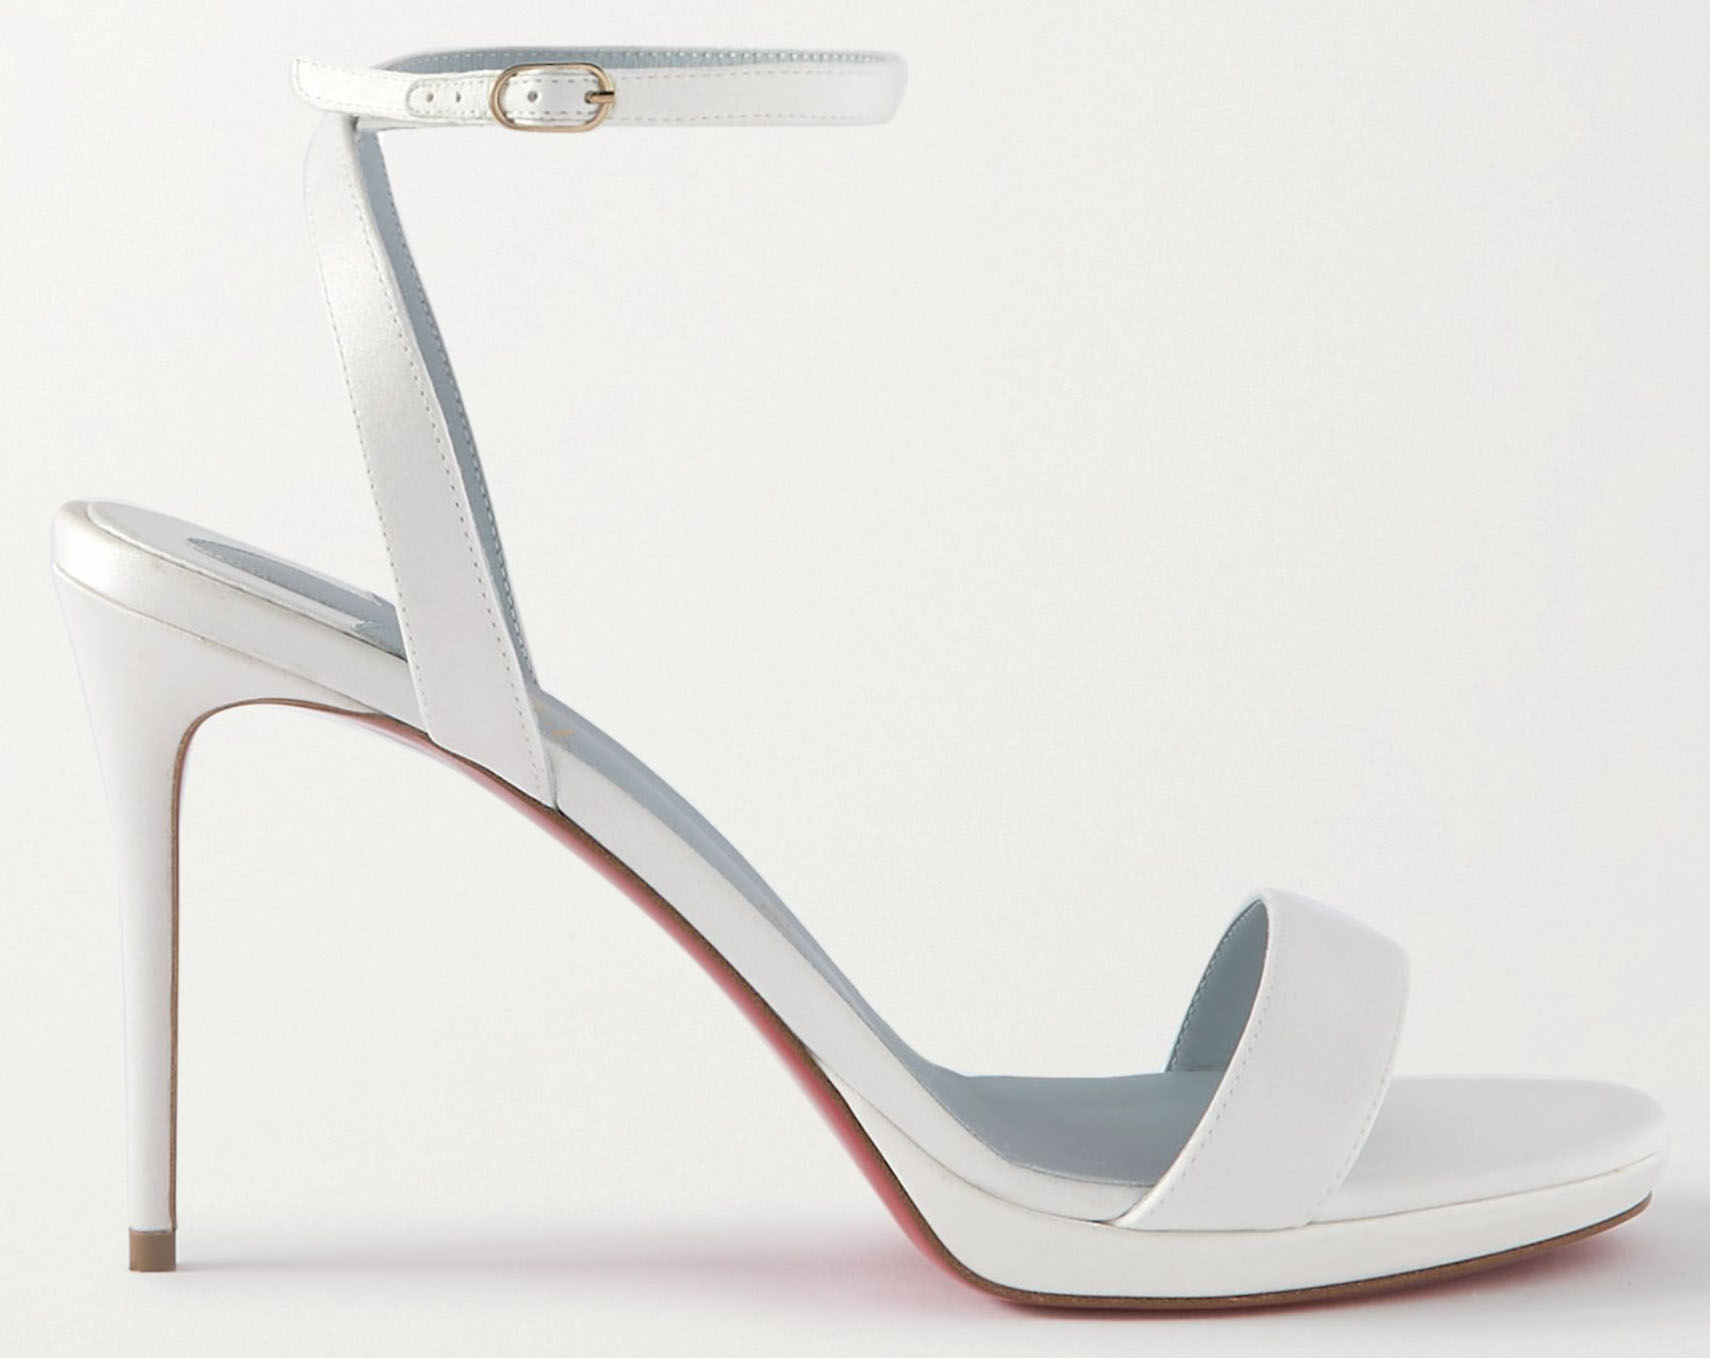 The Loubi Queen sandals feature a white satin upper, an elegant two-strap design, and a 4-inch heel